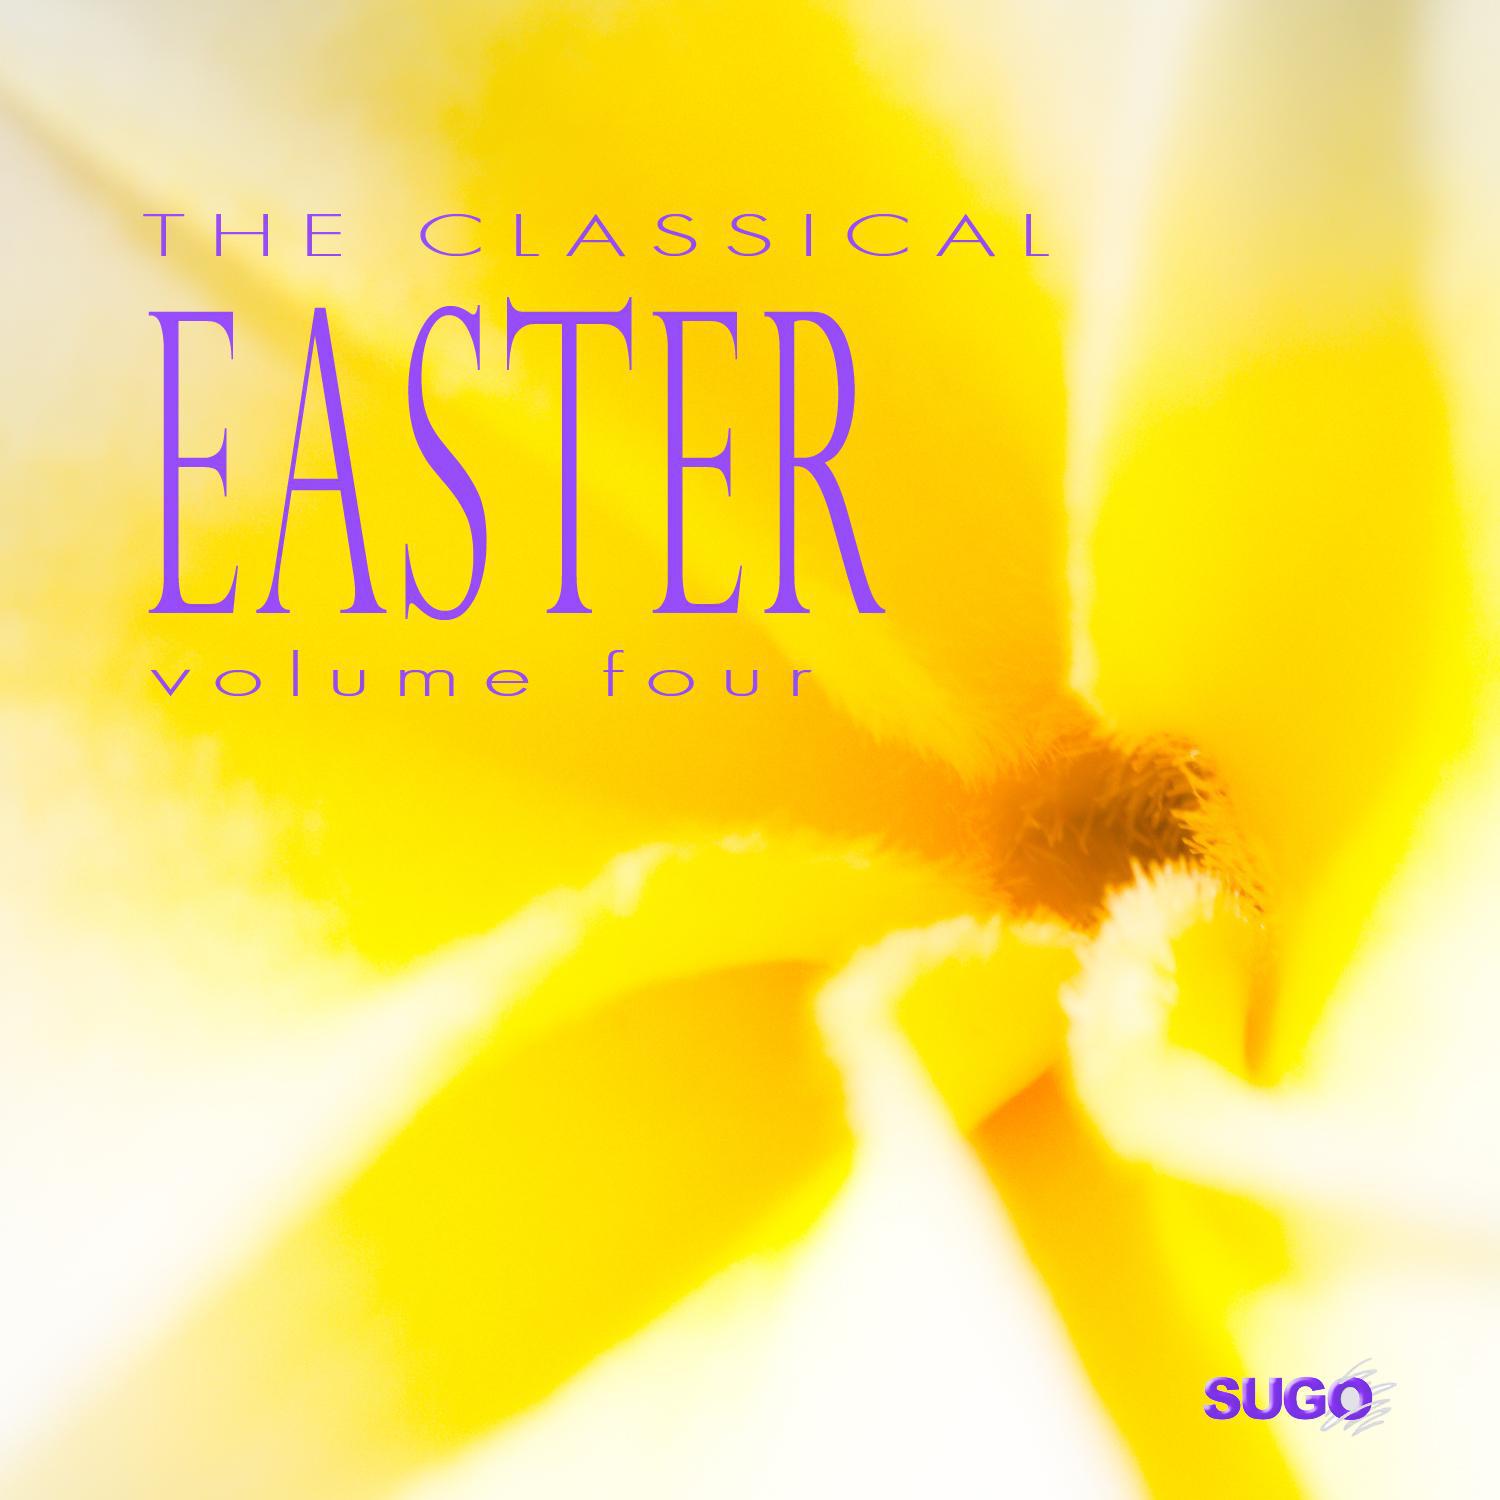 The Classical Easter, Vol. 4